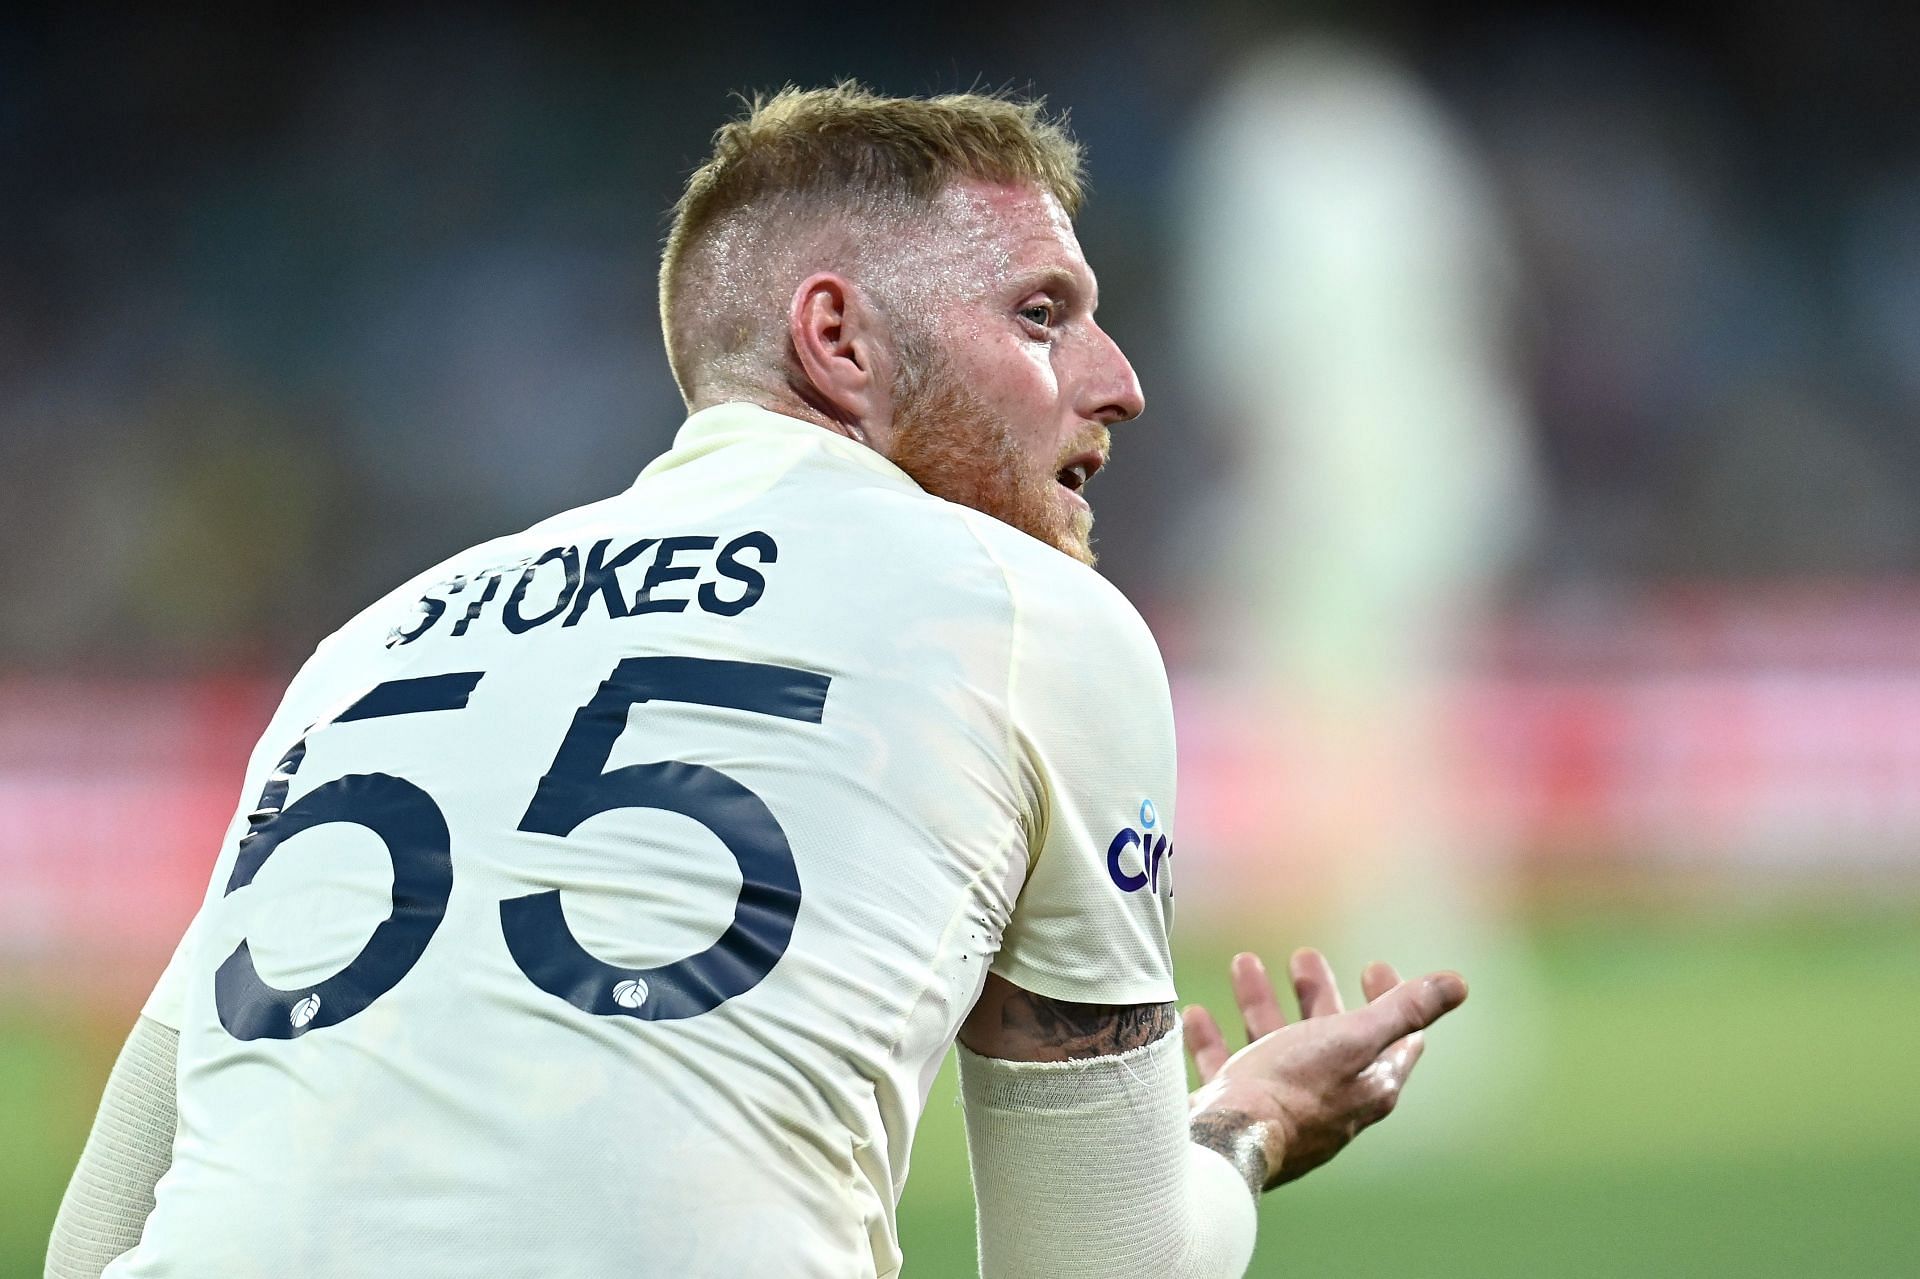 England&#039;s Ben Stokes. (Image Credits: Getty)